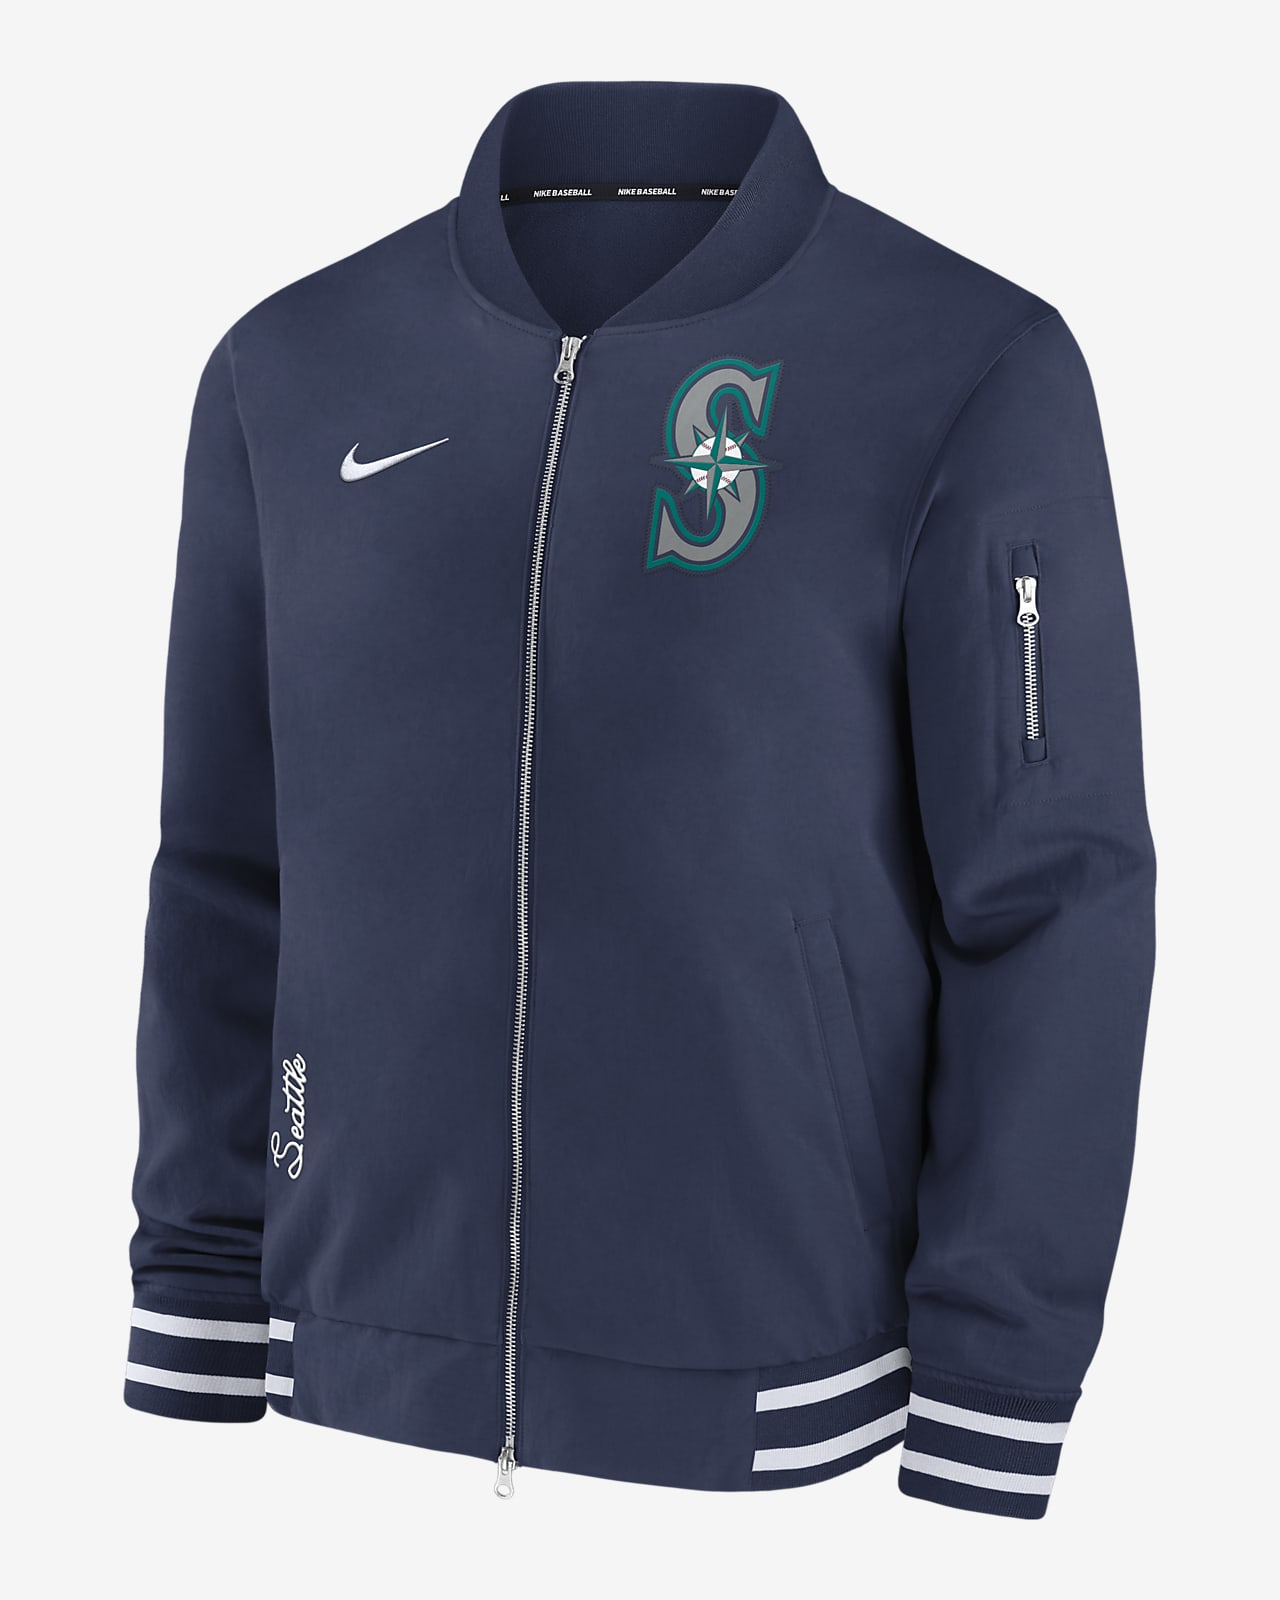 Seattle Mariners Authentic Collection Men's Nike MLB Full-Zip Bomber Jacket